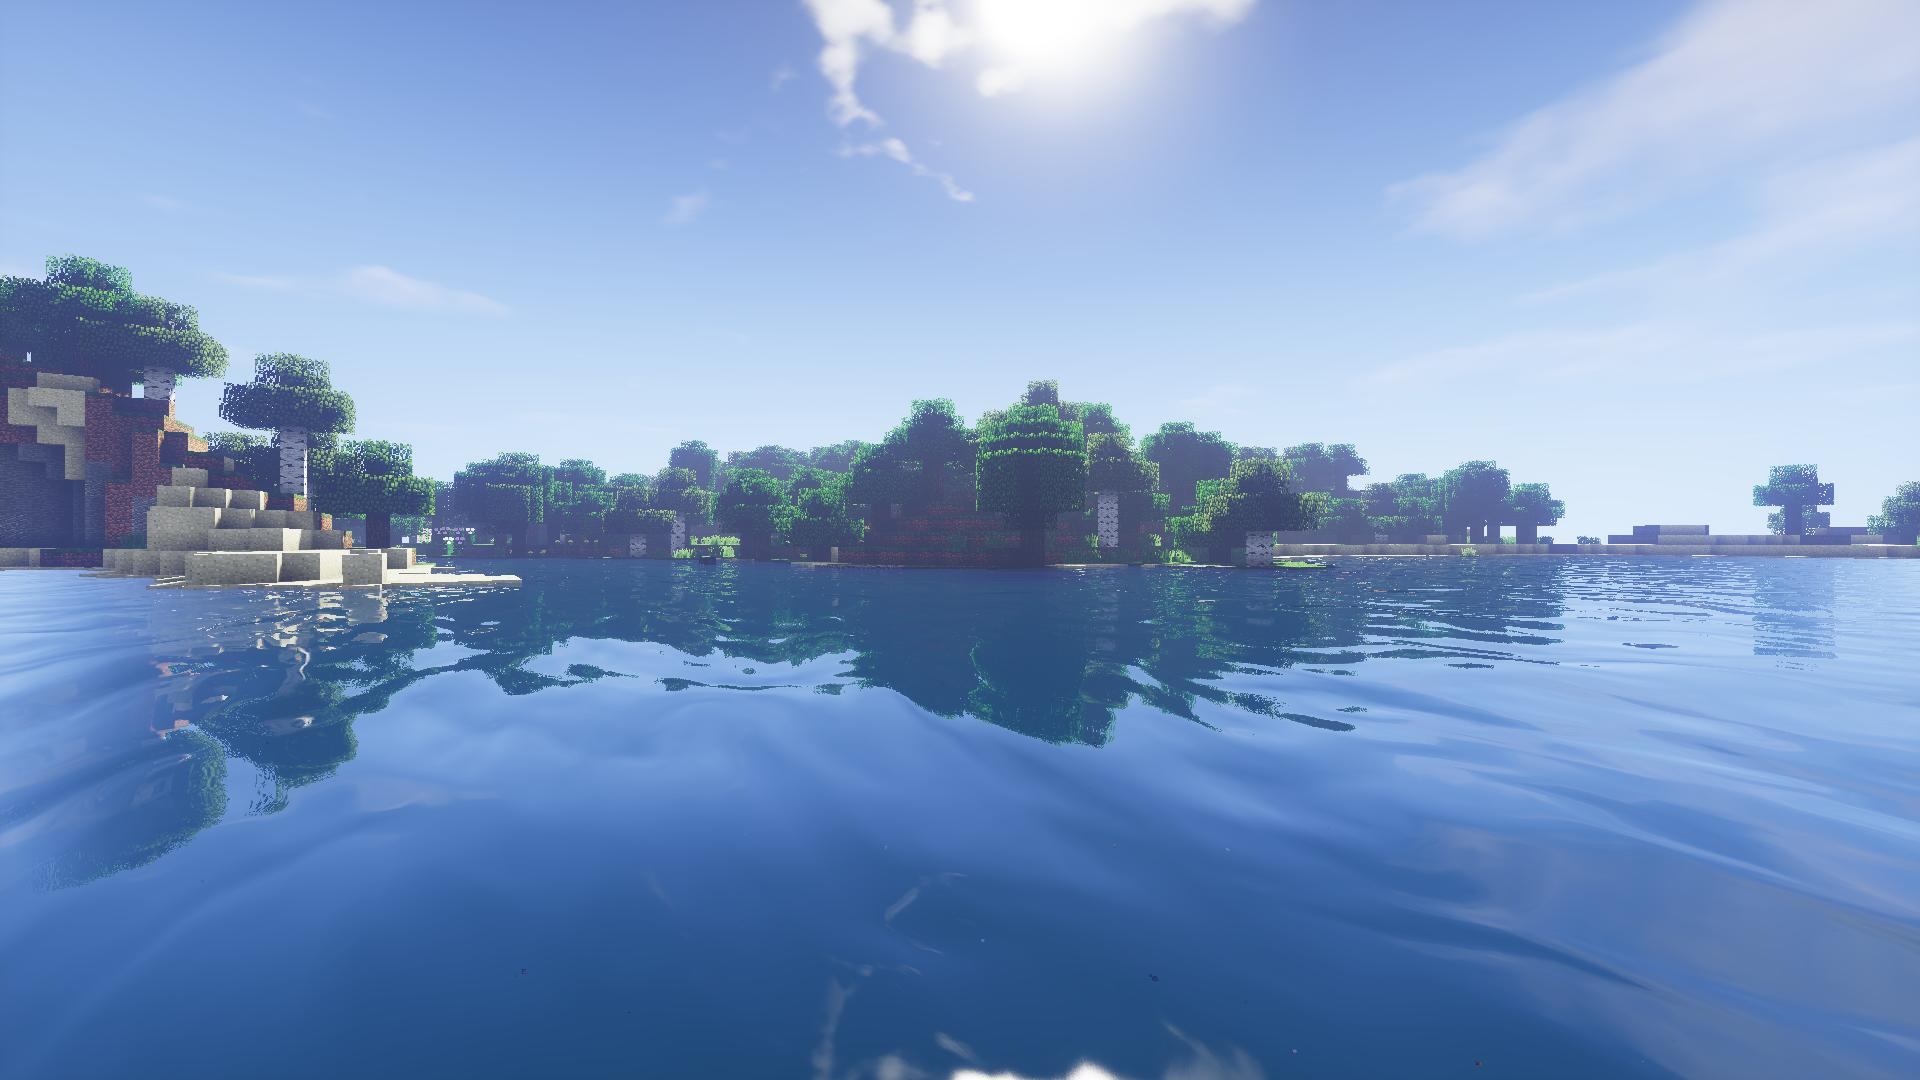 minecraft shaders 1.14.4 texture pack